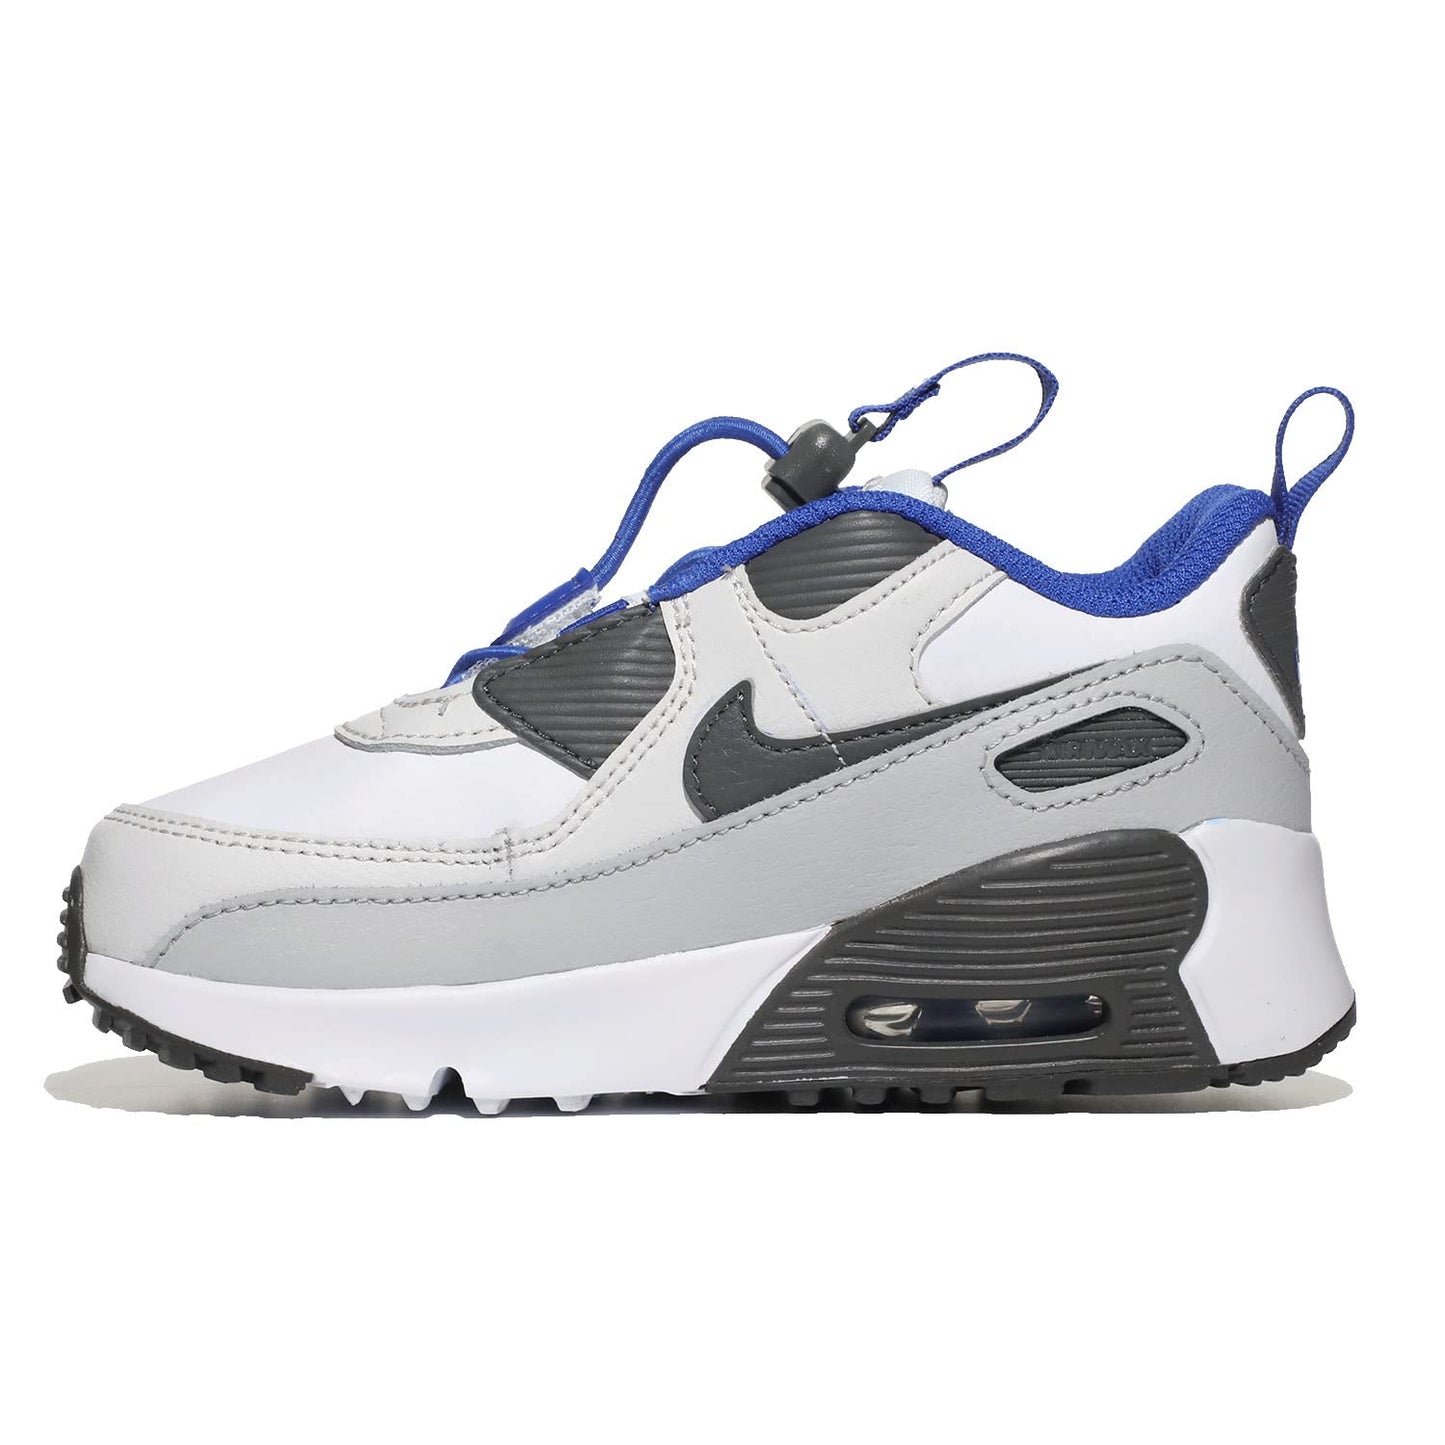 Image 3 of Air Max 90 Toggle (Infant/Toddler)